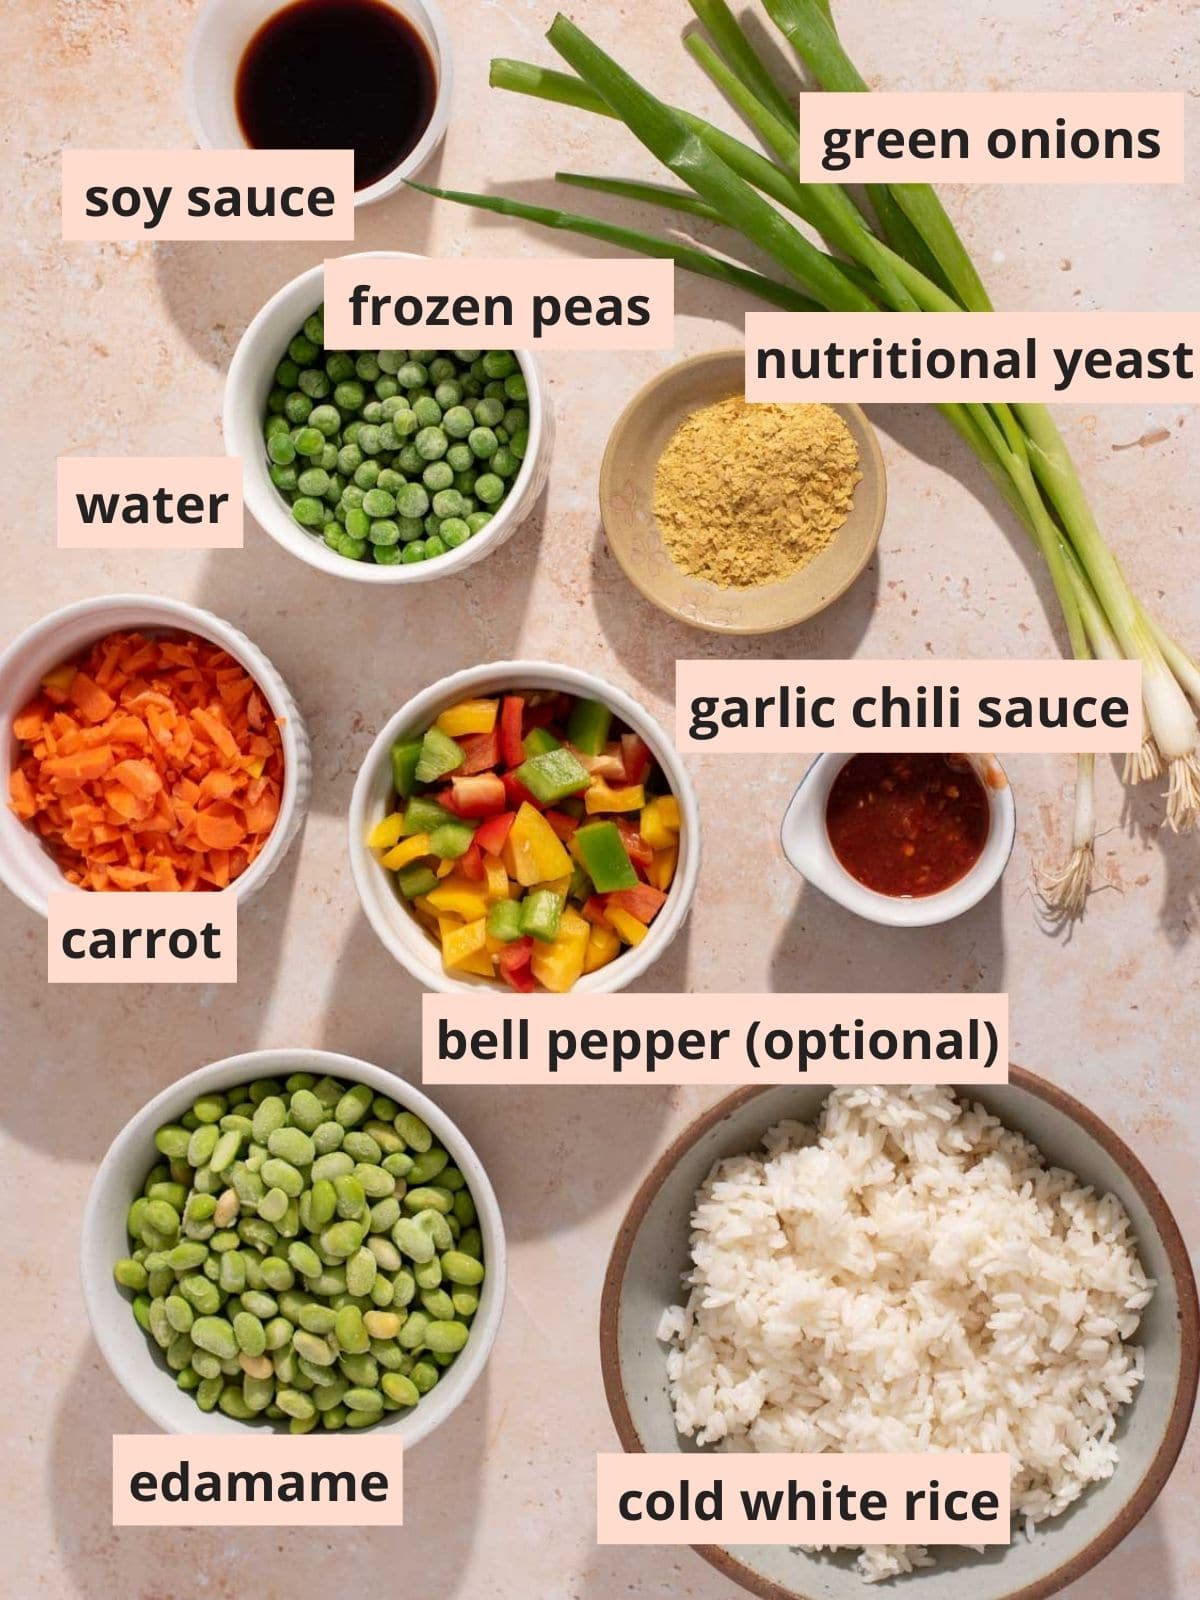 Labeled ingredients used to make fried rice